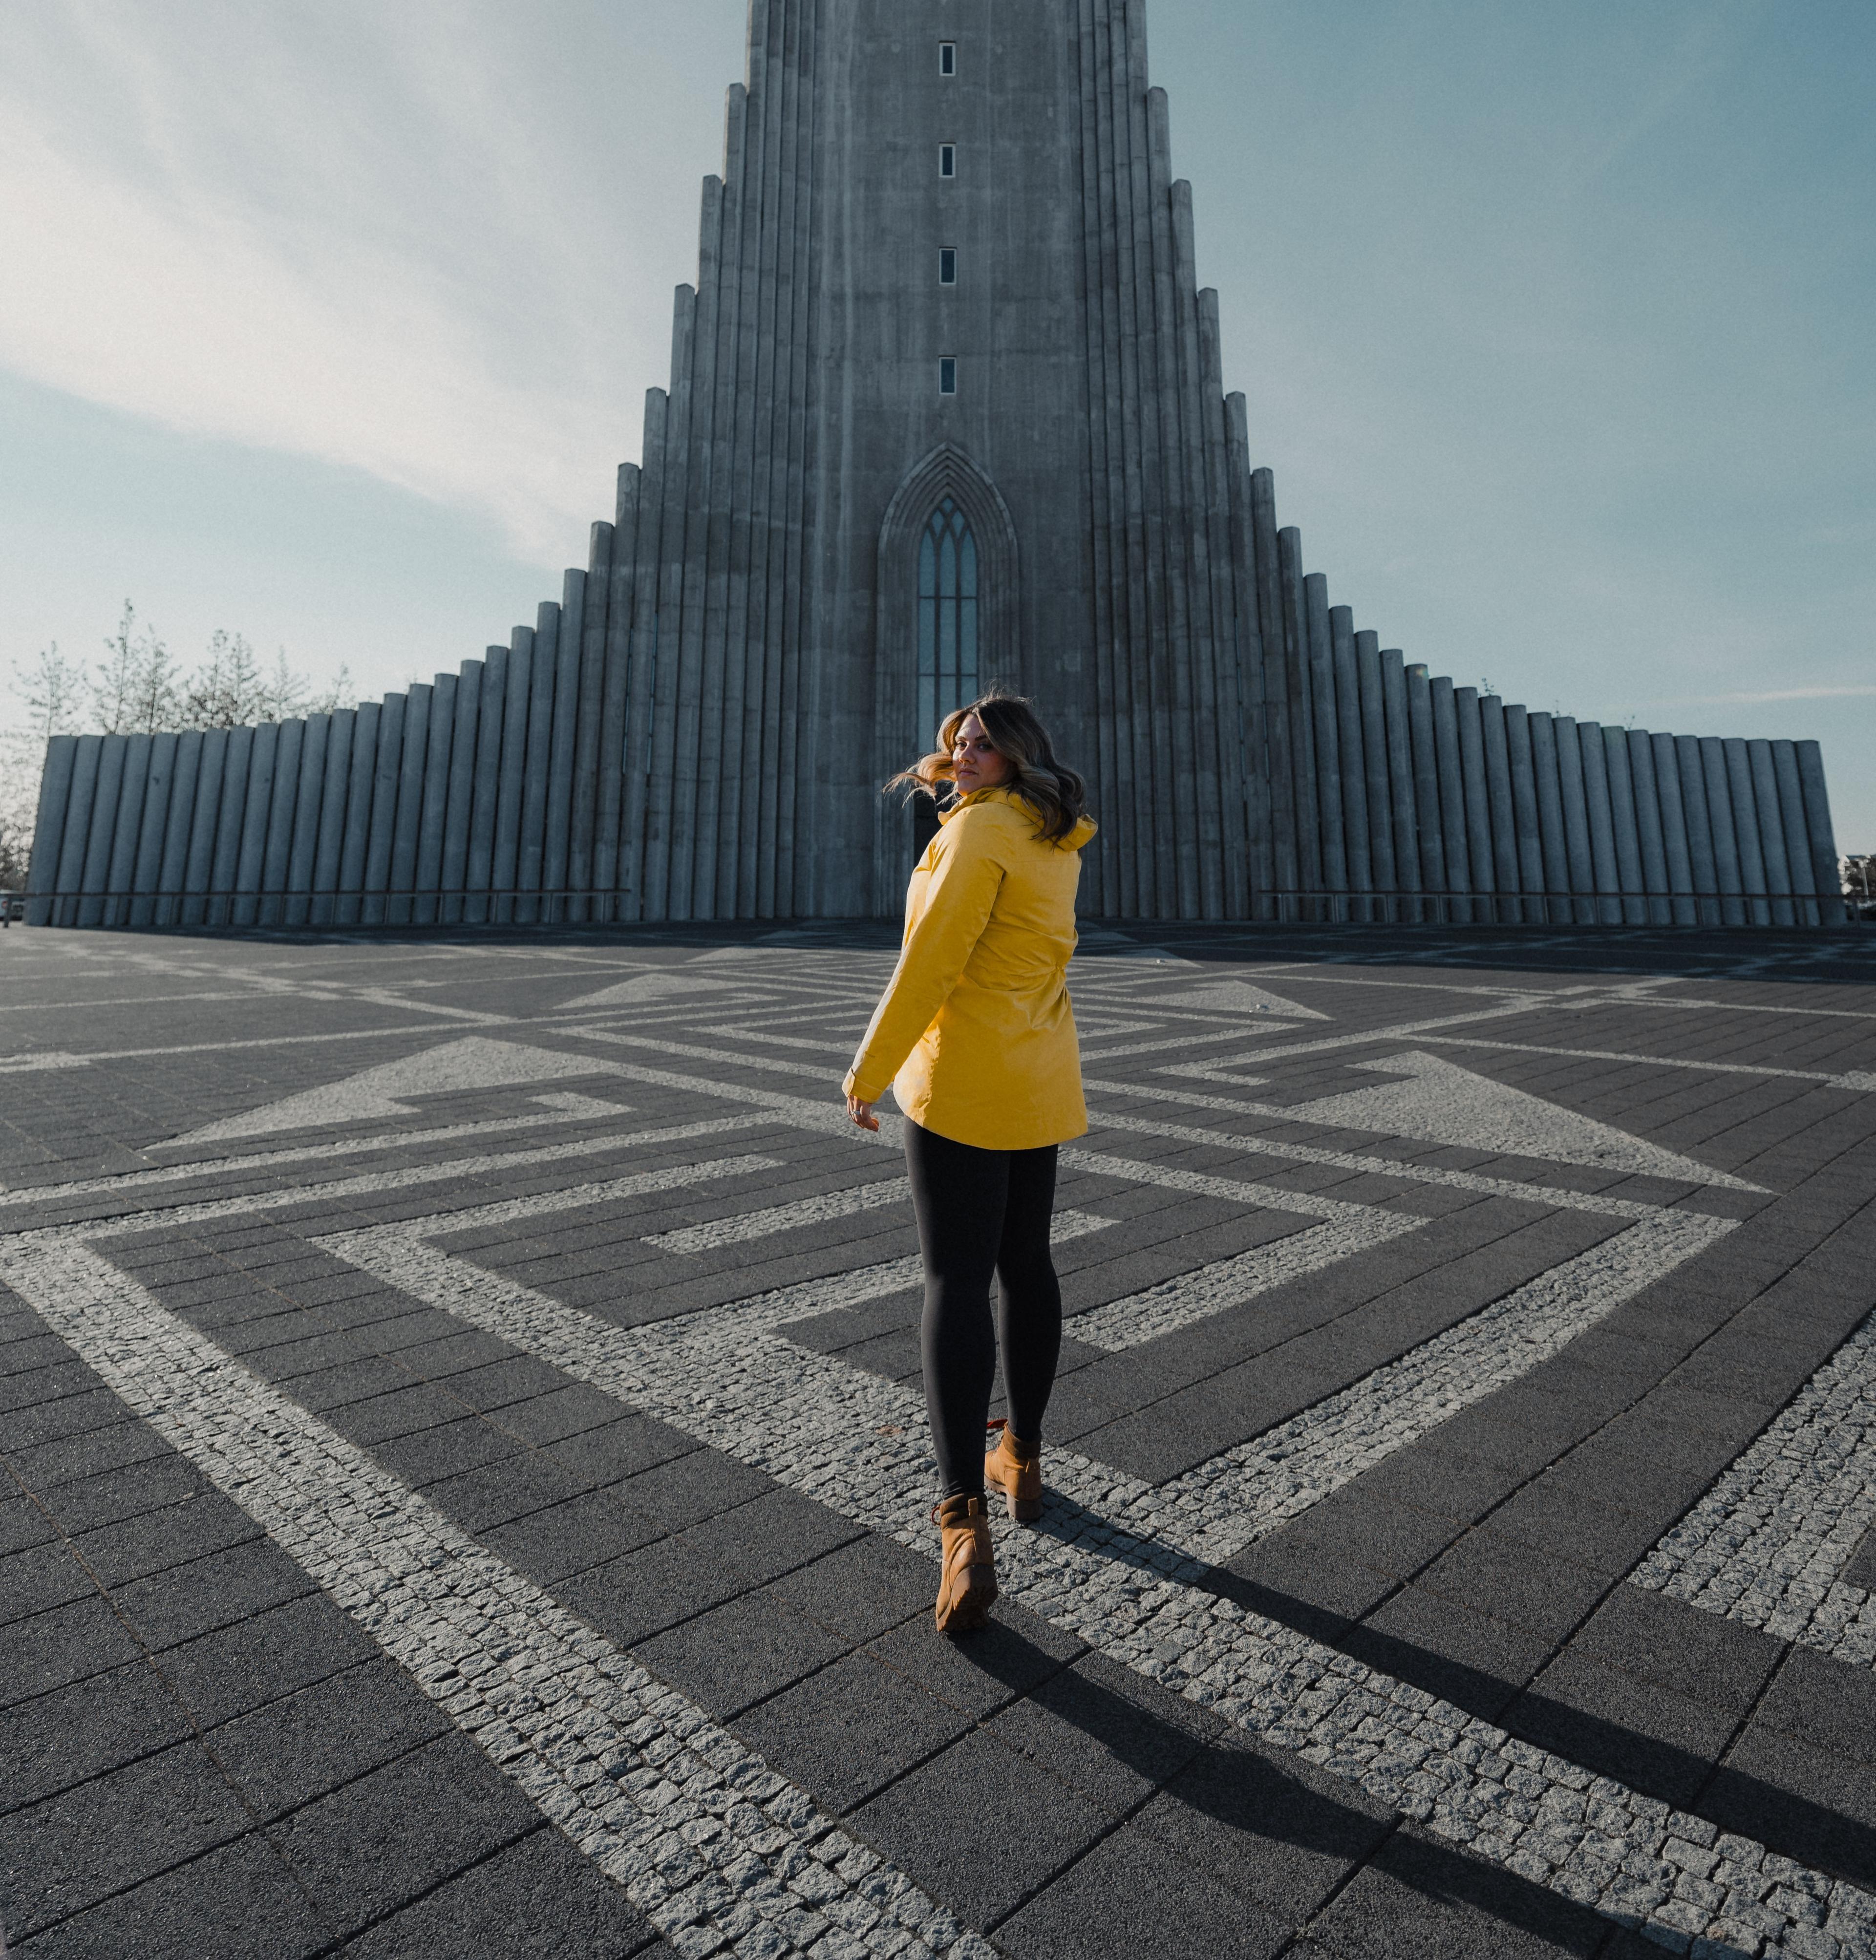 A woman in a light yellow jacket strolling towards the Hallgrimskirkja church, bathed in sunshine.